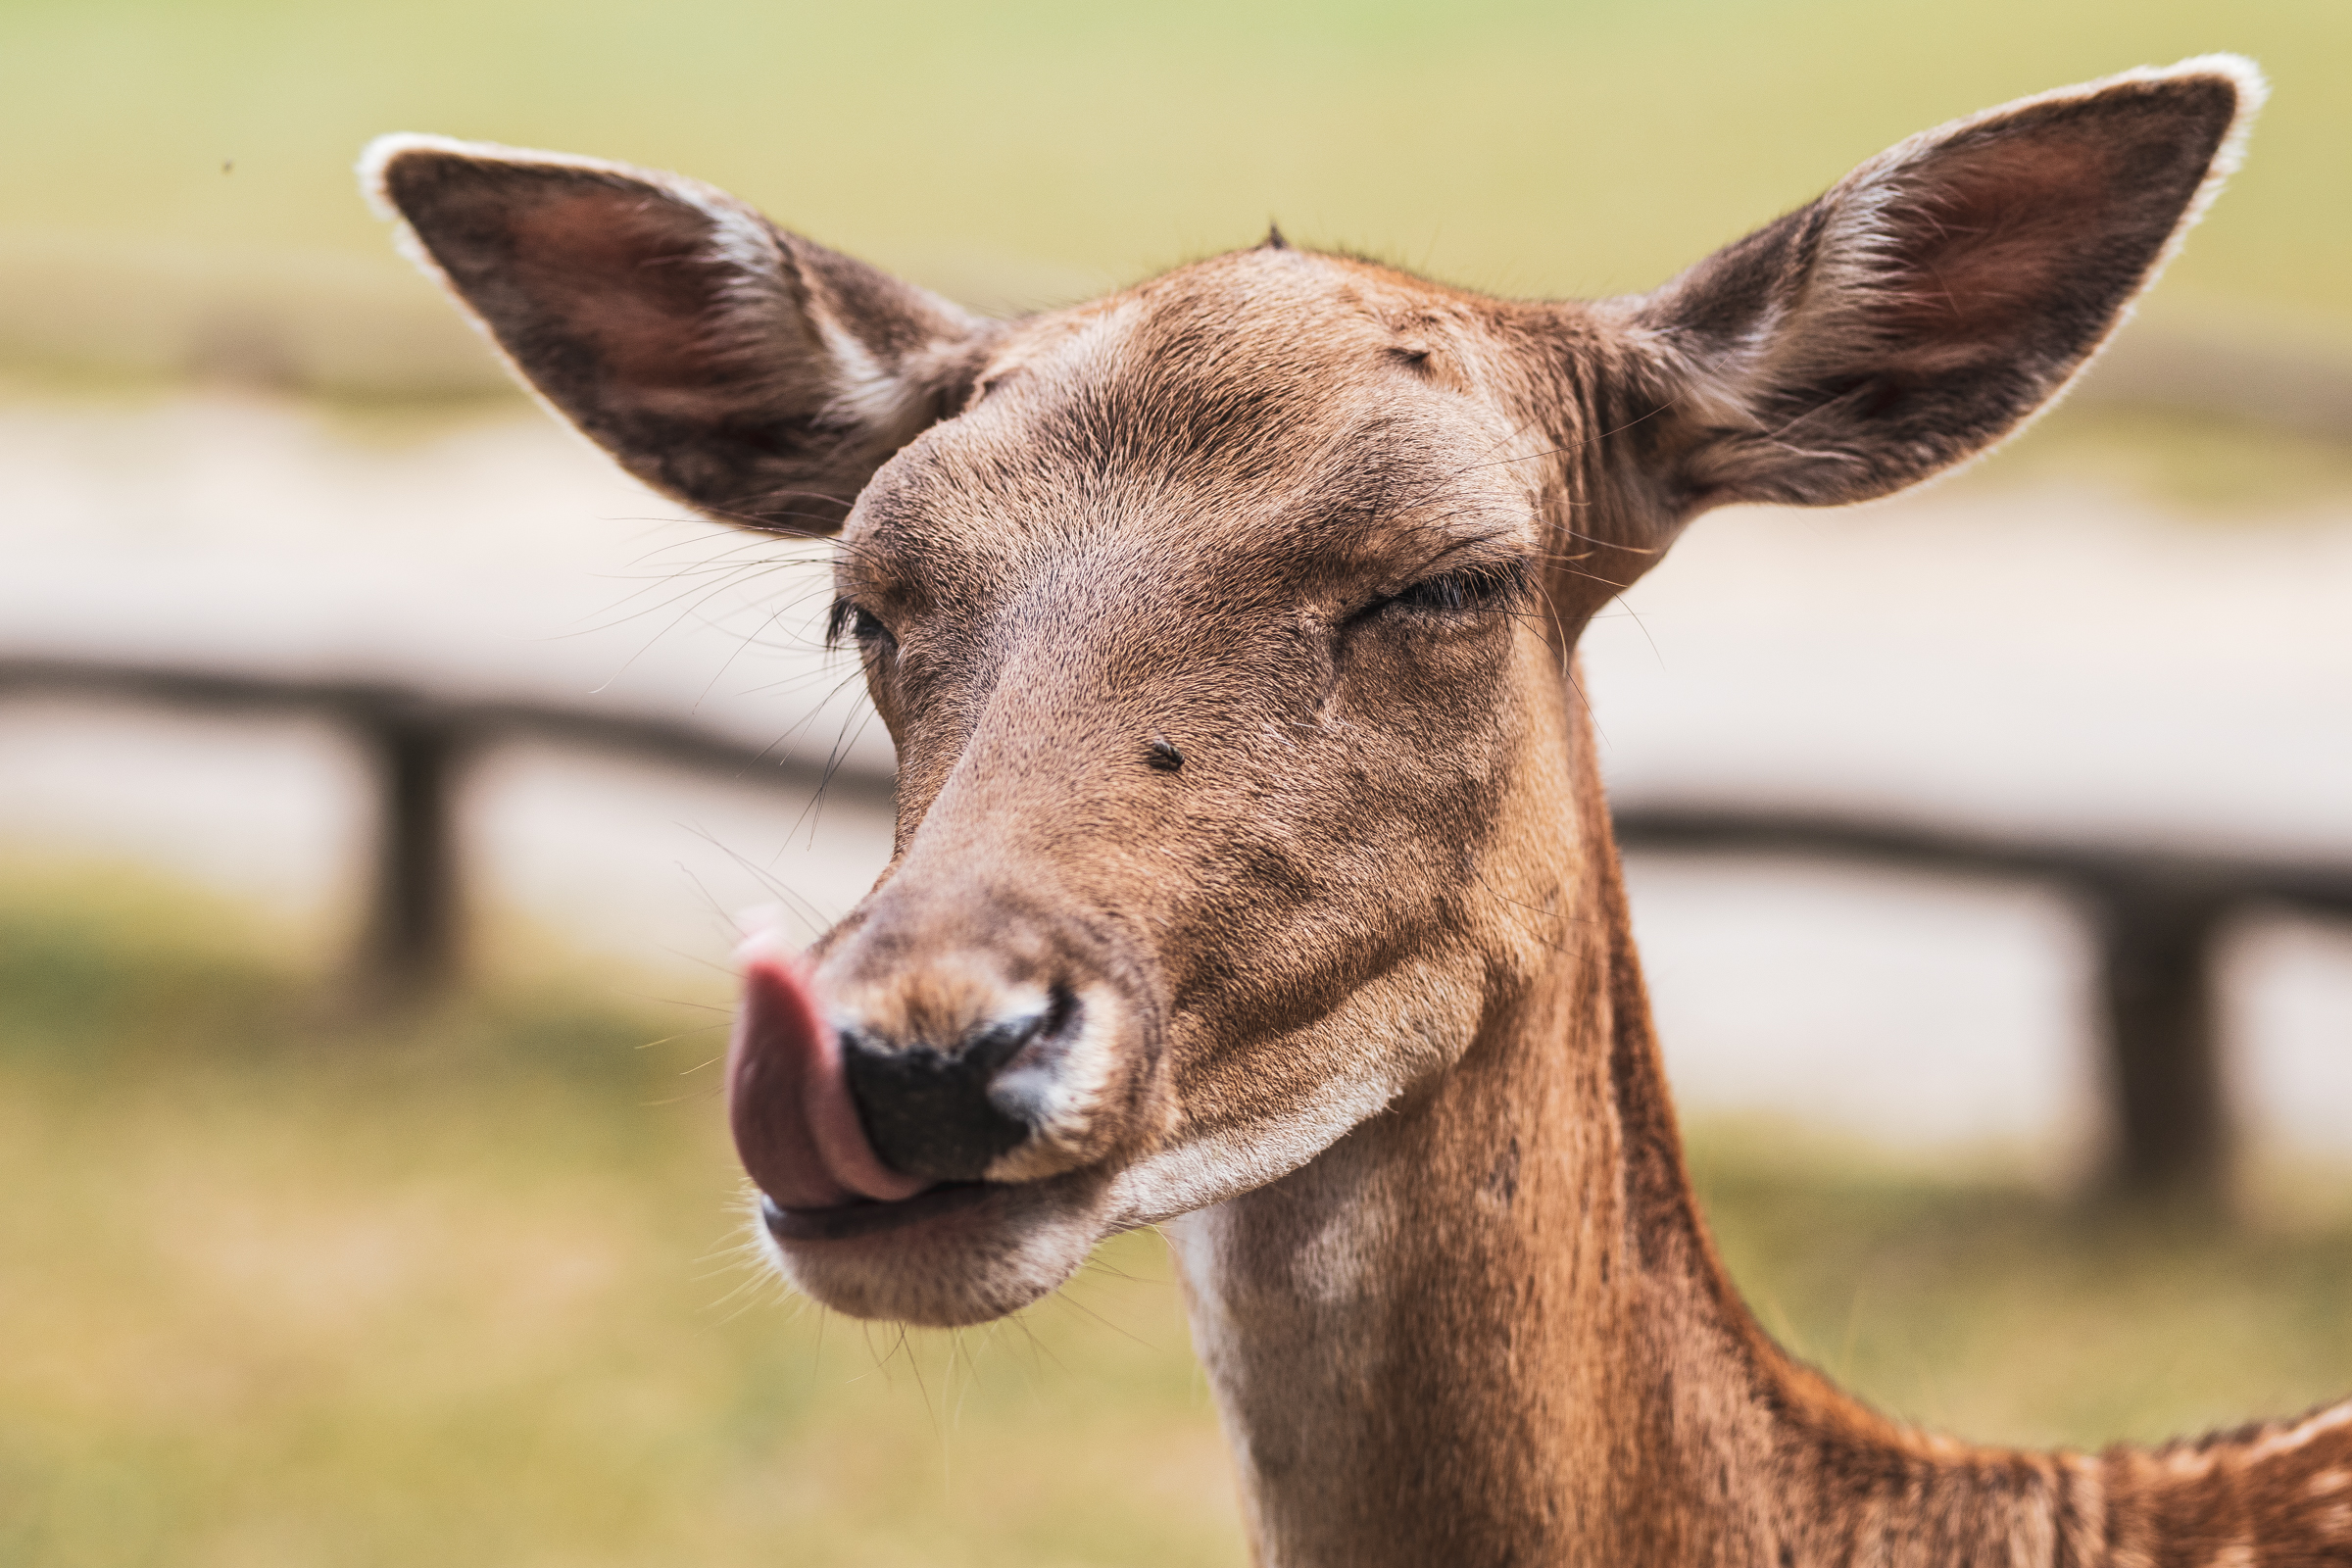 A deer licking its lick with closed eyes after eating a tasty apple